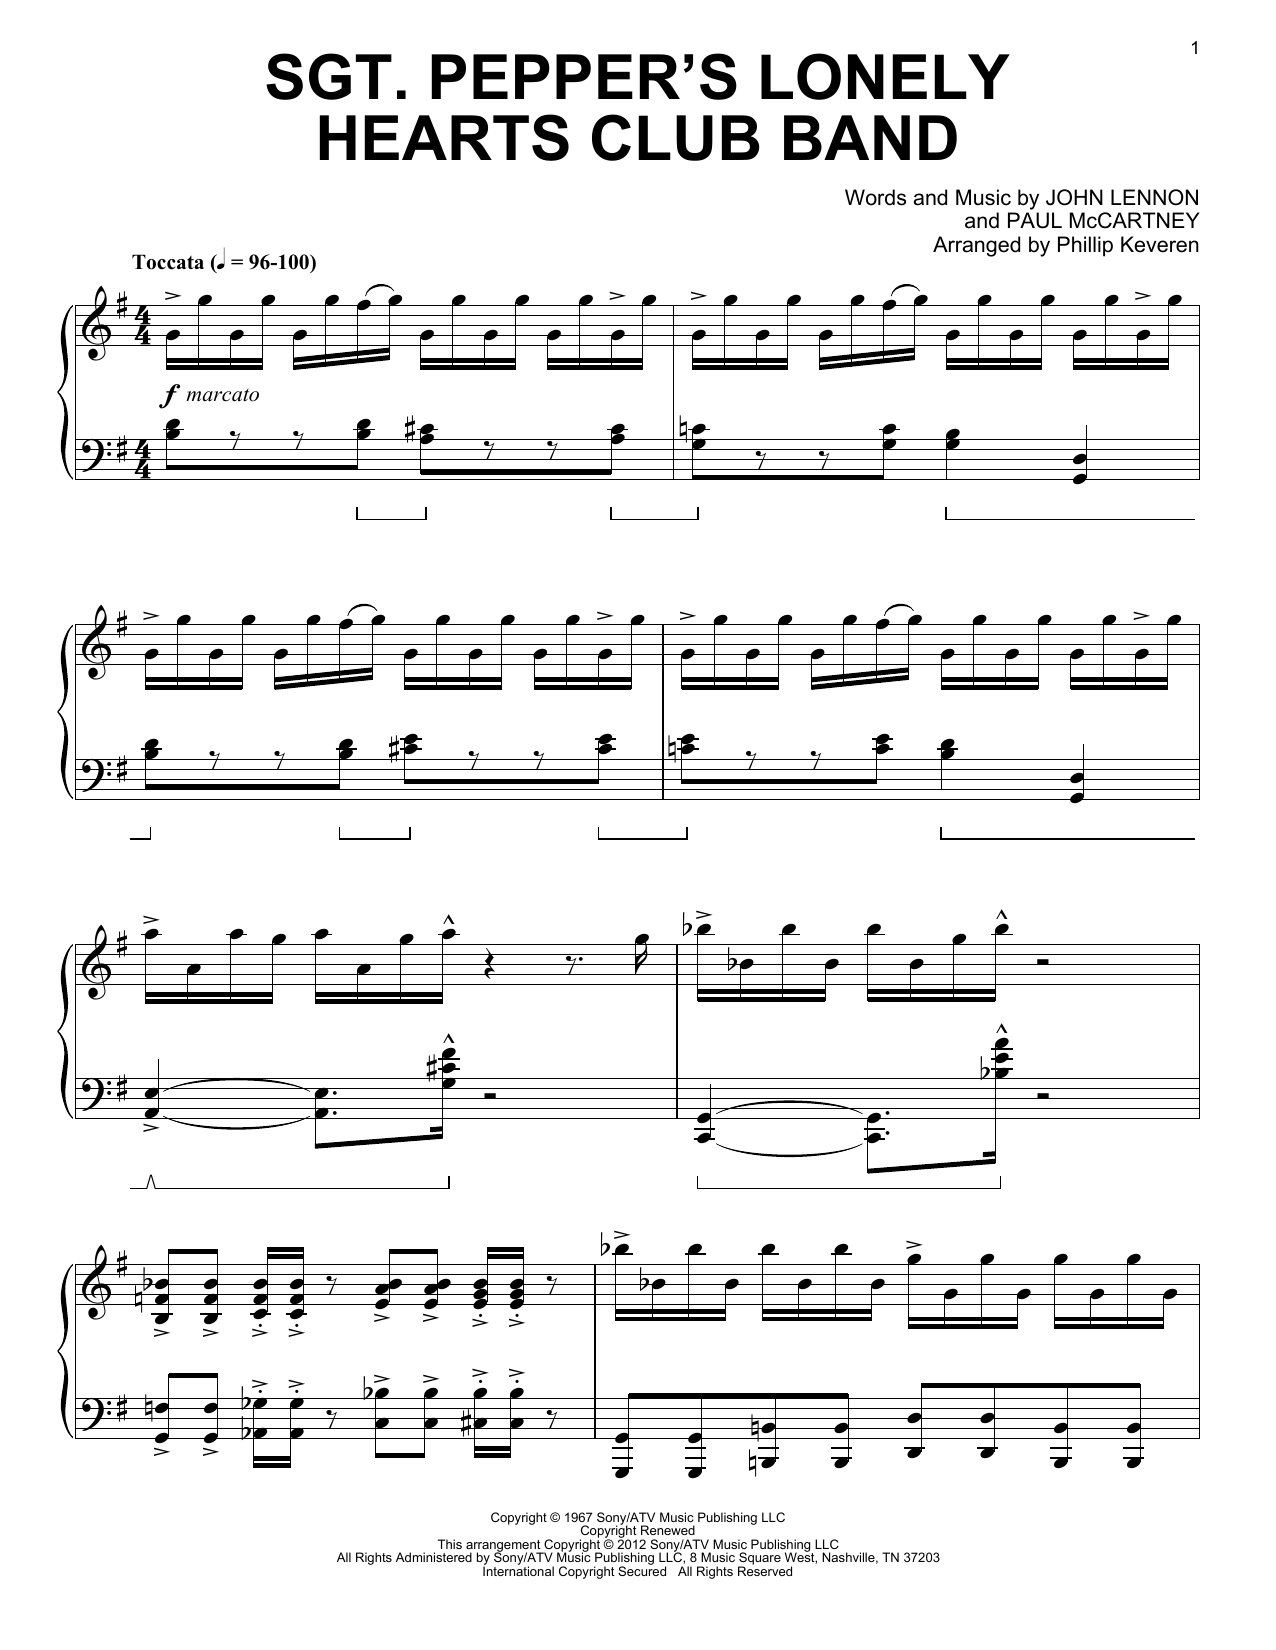 Download The Beatles Sgt. Pepper's Lonely Hearts Club Band [ Sheet Music